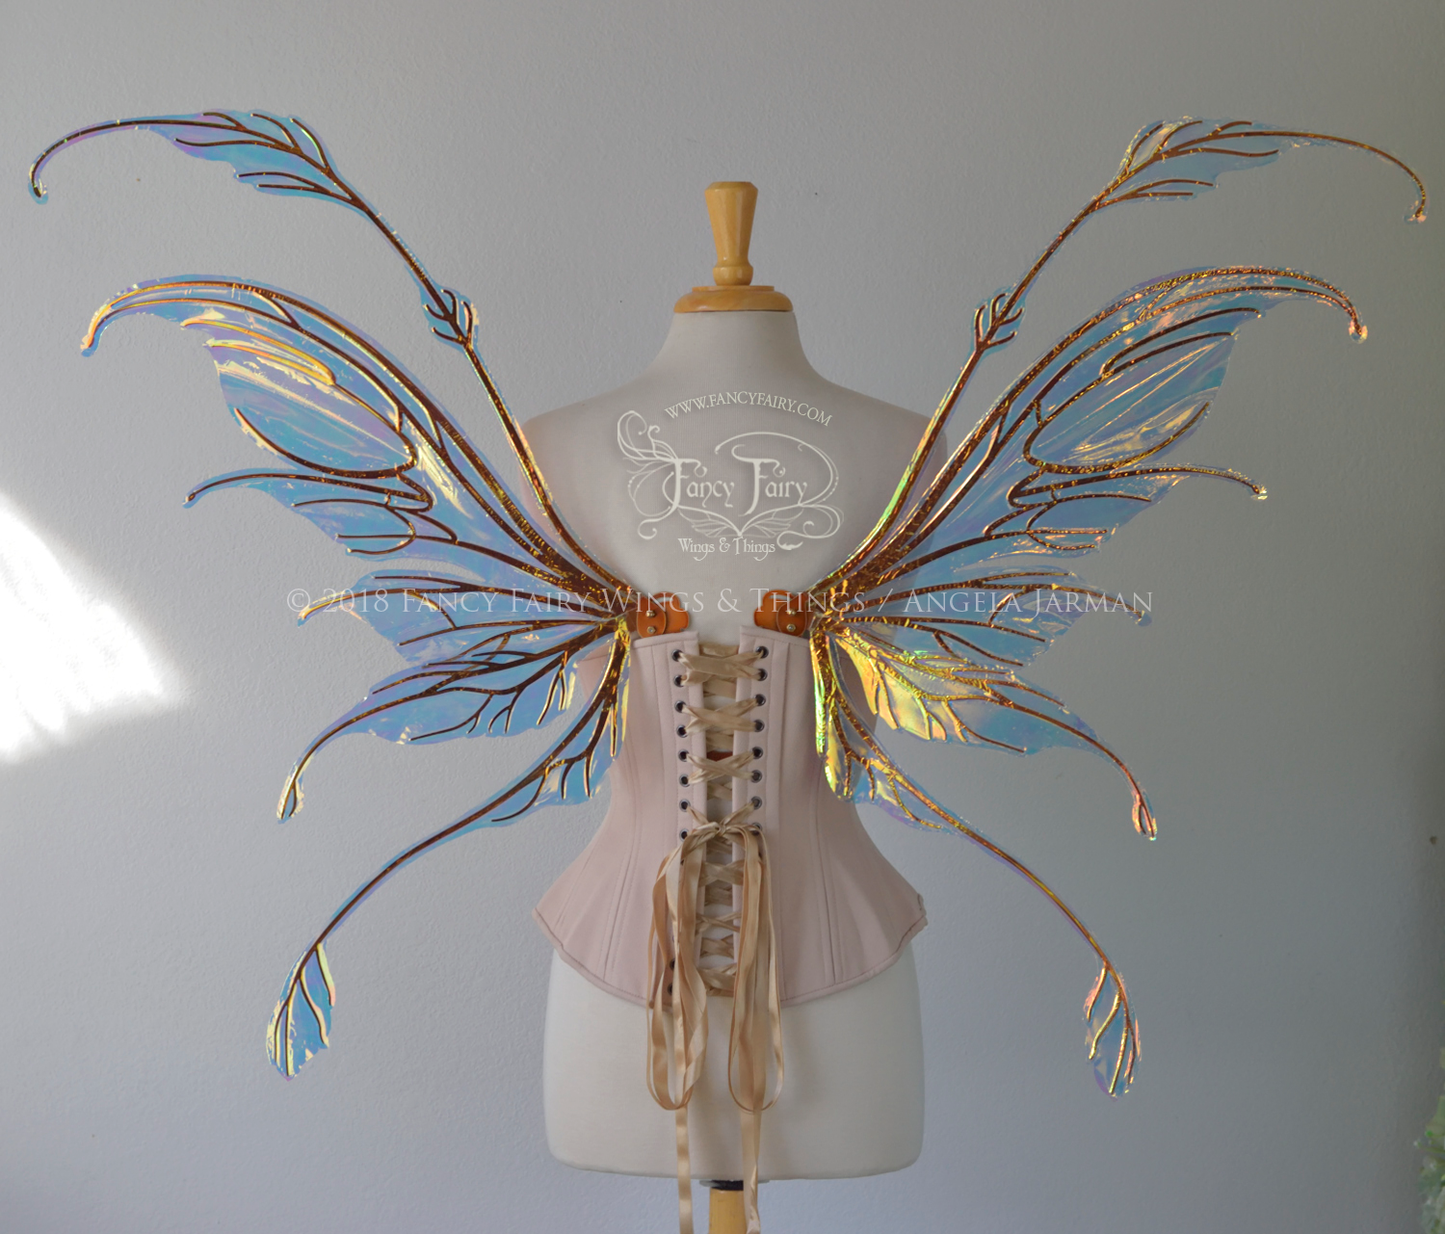 Fauna Iridescent Convertible Fairy Wings in Clear Diamond Fire with Copper veins